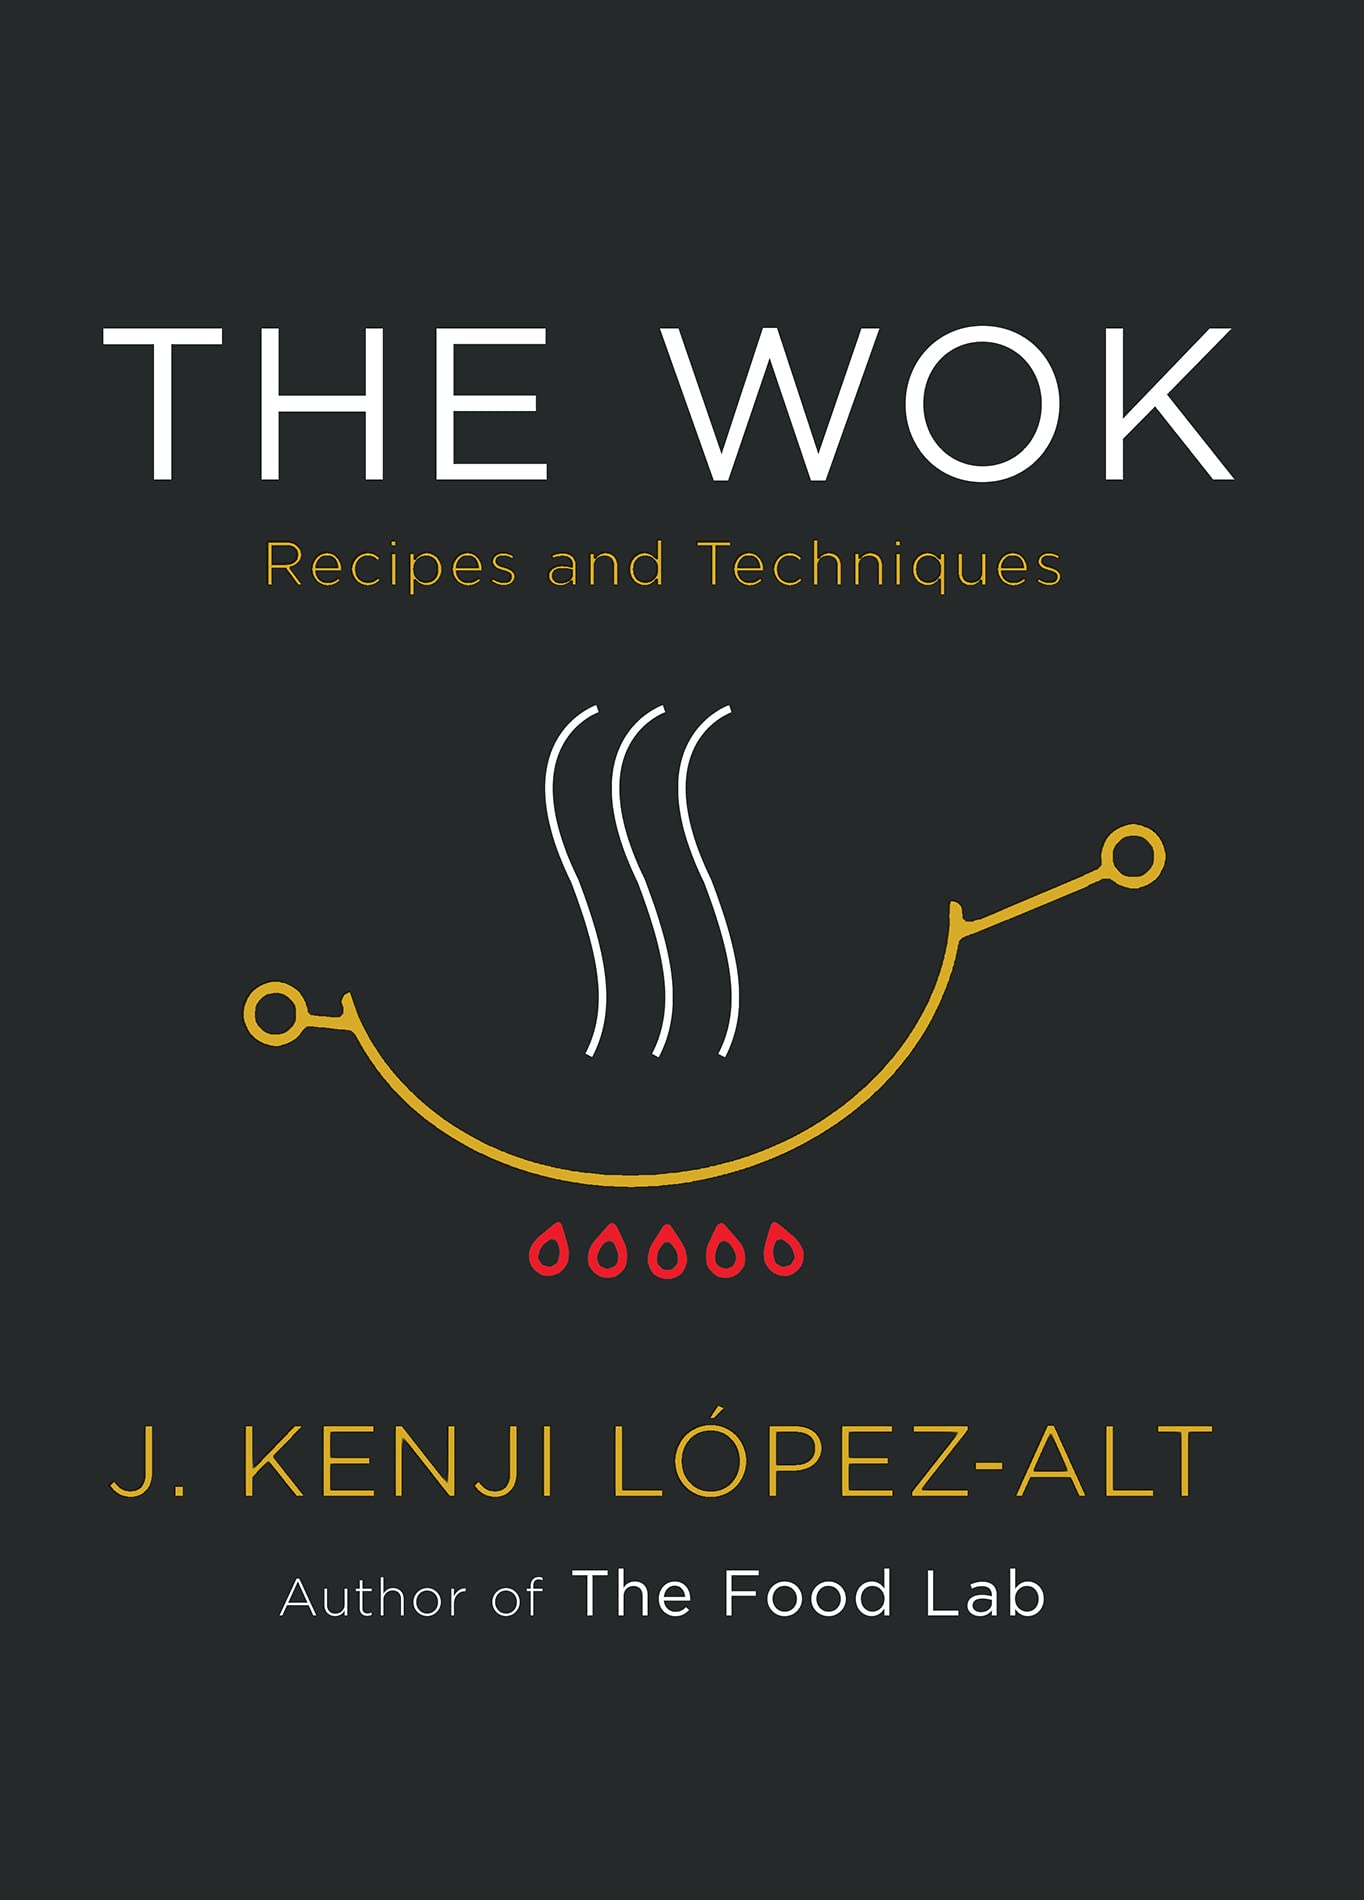 The Wok: Recipes and Techniques by J. Kenji Lopez-Alt [Hardcover] - LV'S Global Media